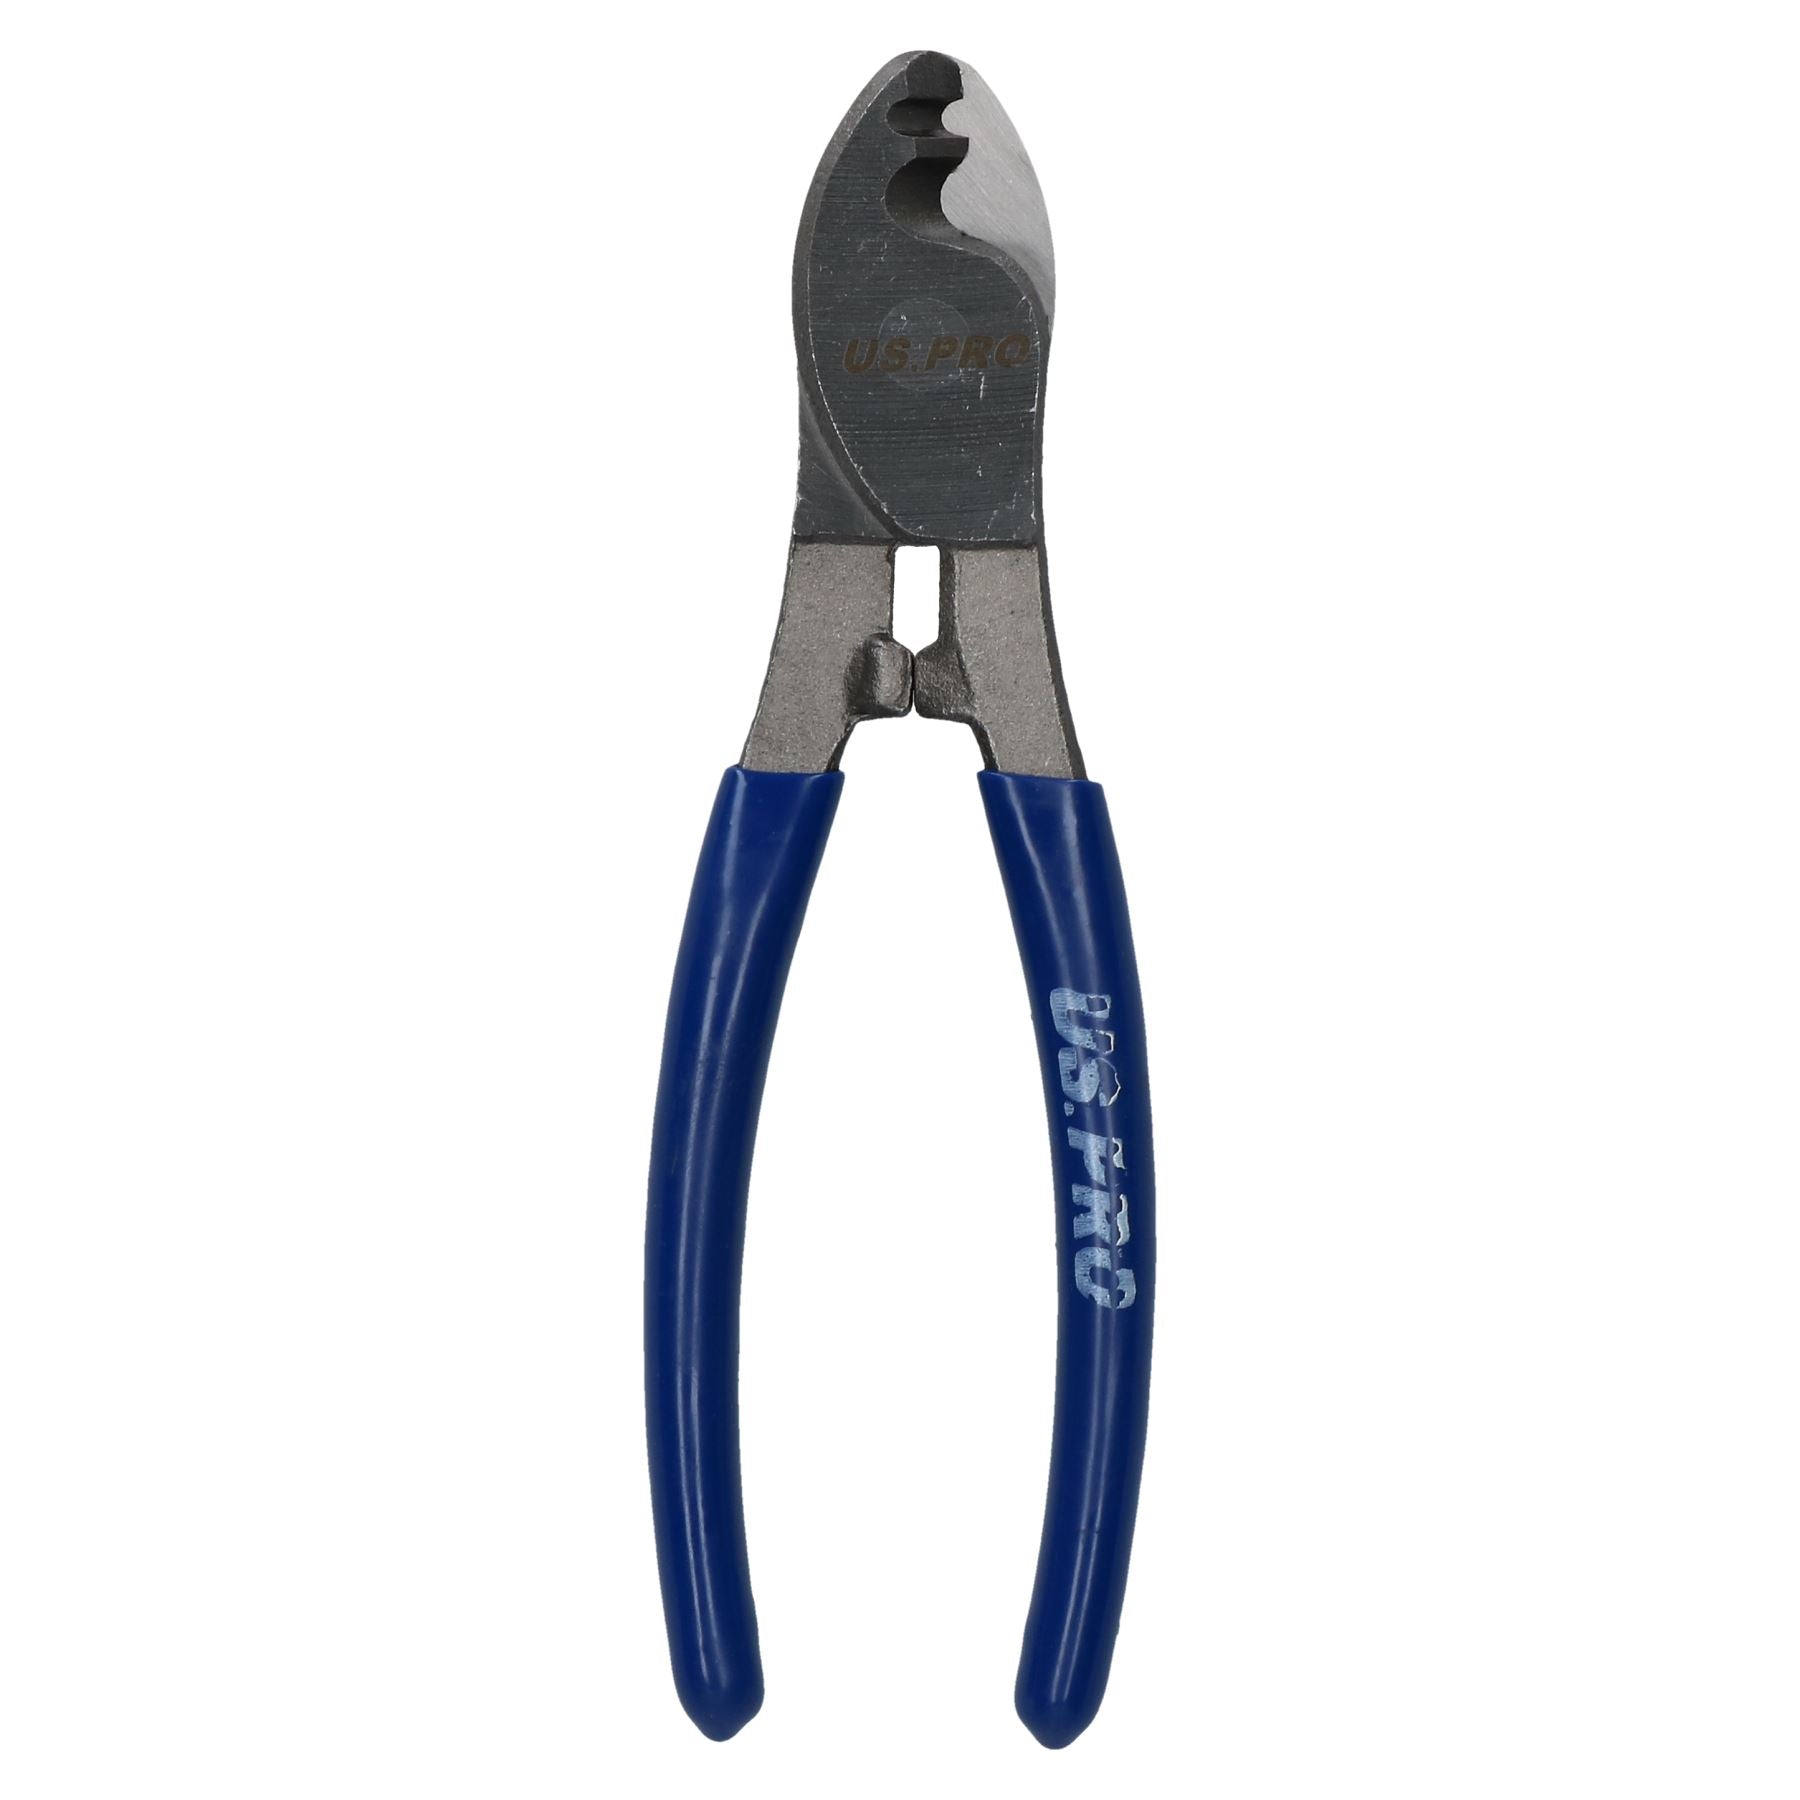 6" / 150mm Wire Cutter Cable Cutters Cutting Pliers Fencing Snips Pliers Plier